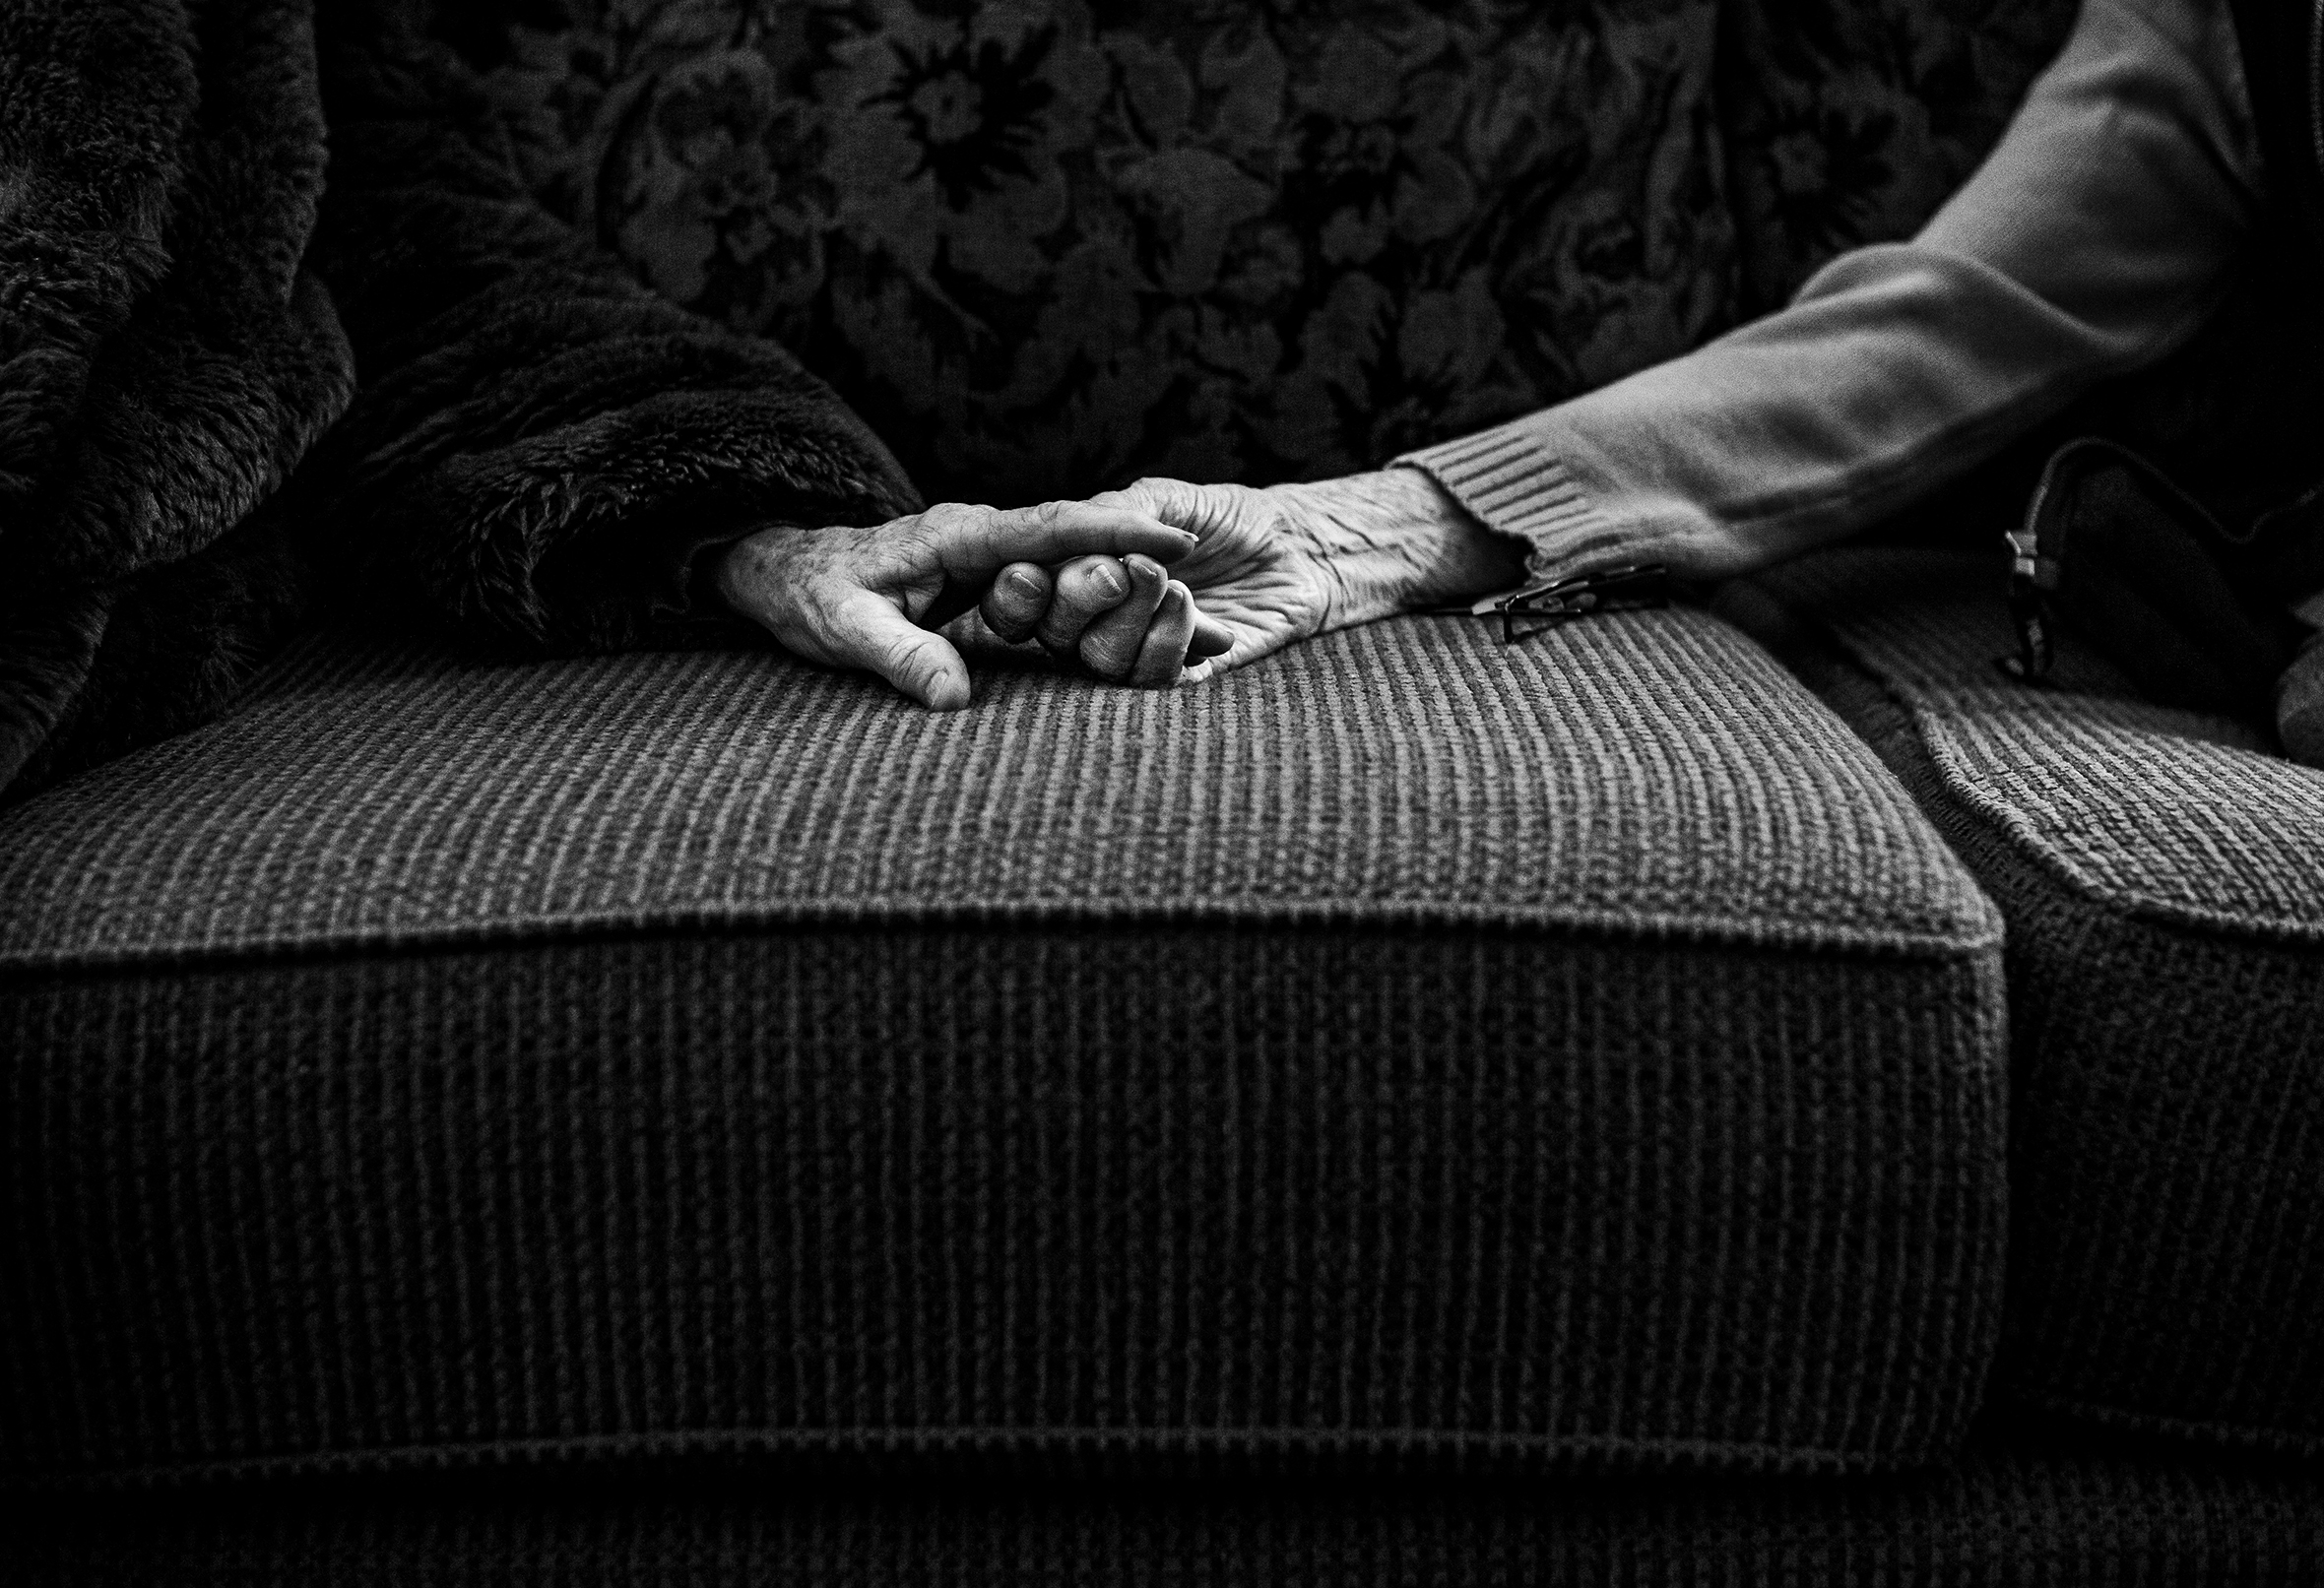 Two elderly people holding hands on a sofa with a close-up on the hands.